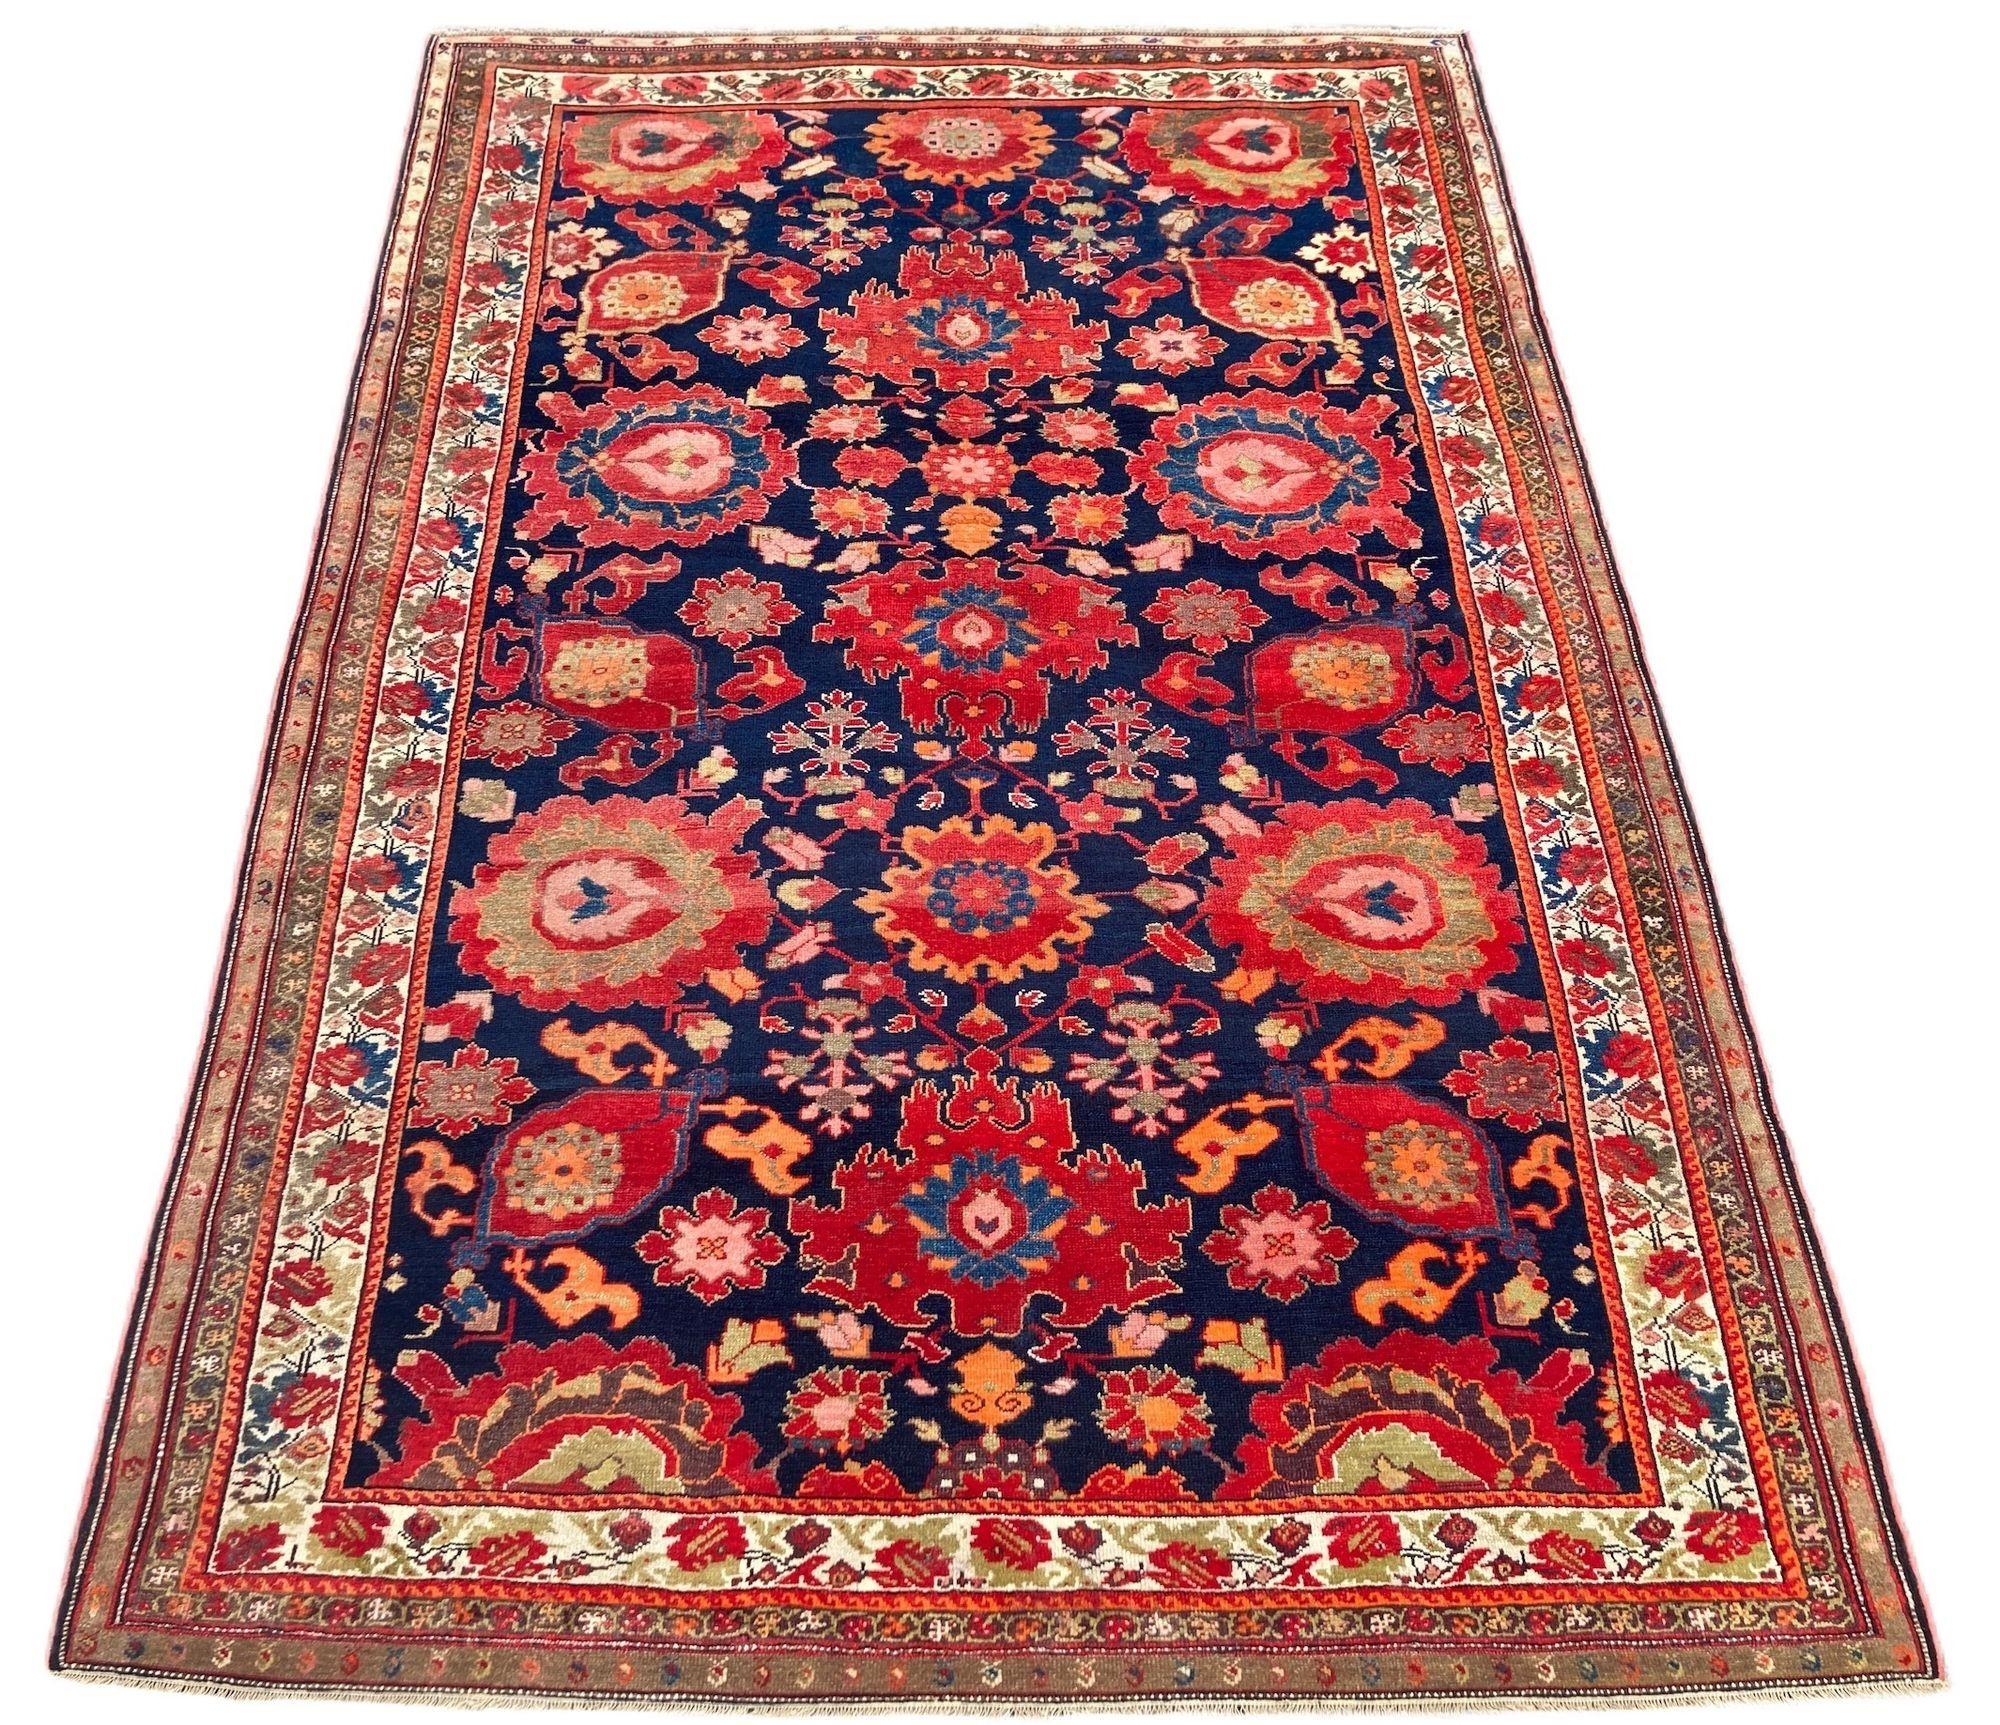 An exceptional antique Malayer rug, hand woven circa 1900. The design features an allover design of large palmettes on a deep indigo field and small ivory border decorated with roses. Fabulous secondary colours including pinks and greens and a